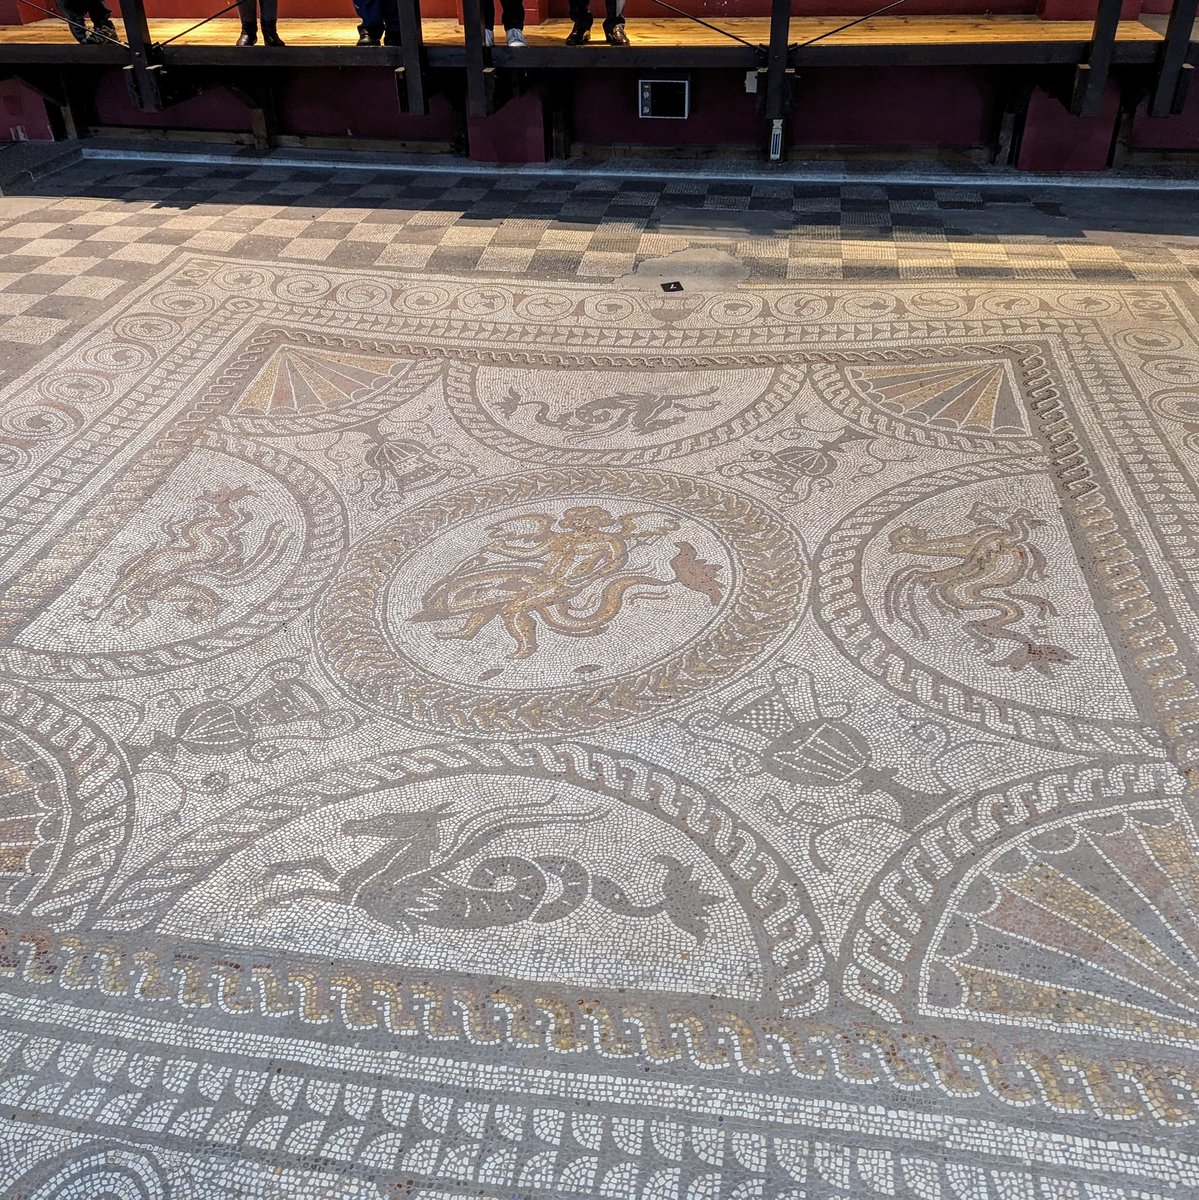 Enjoyed sampling for @Commiosproject at the Fishbourne Collections Discovery Centre @romanpalace @TheNovium today! And this time I had time to look around the palace once I was finished. Absolutely stunning mosaic floors 🤩